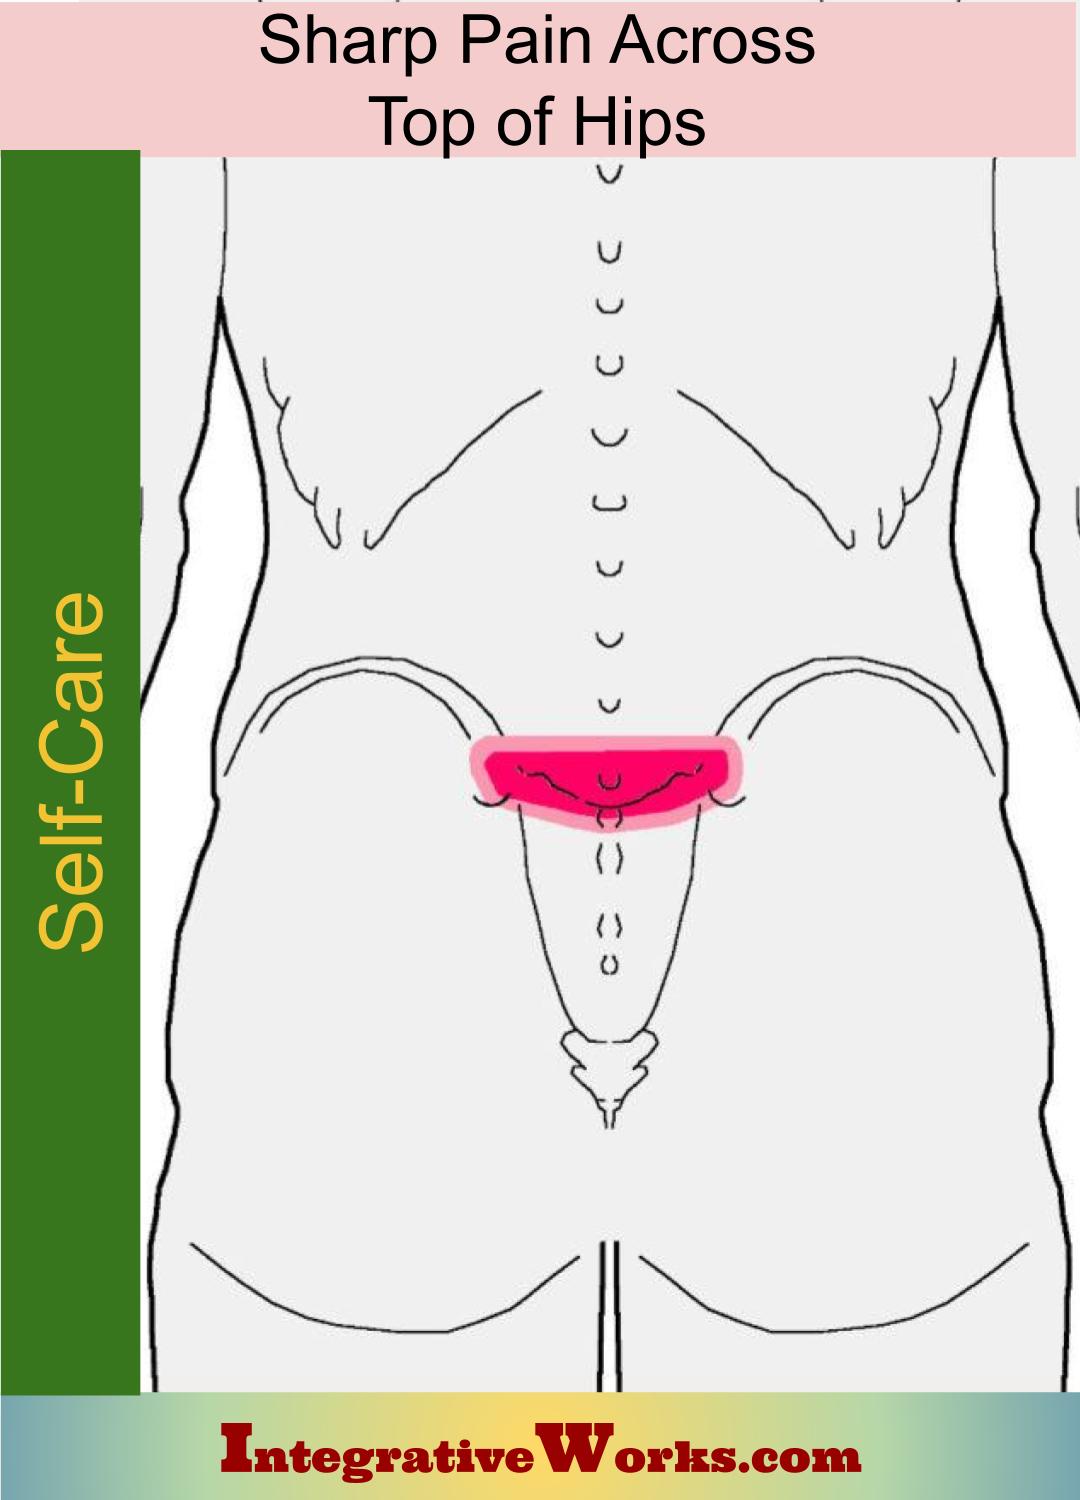 Self Care – Sharp Pain Across Top of Hips